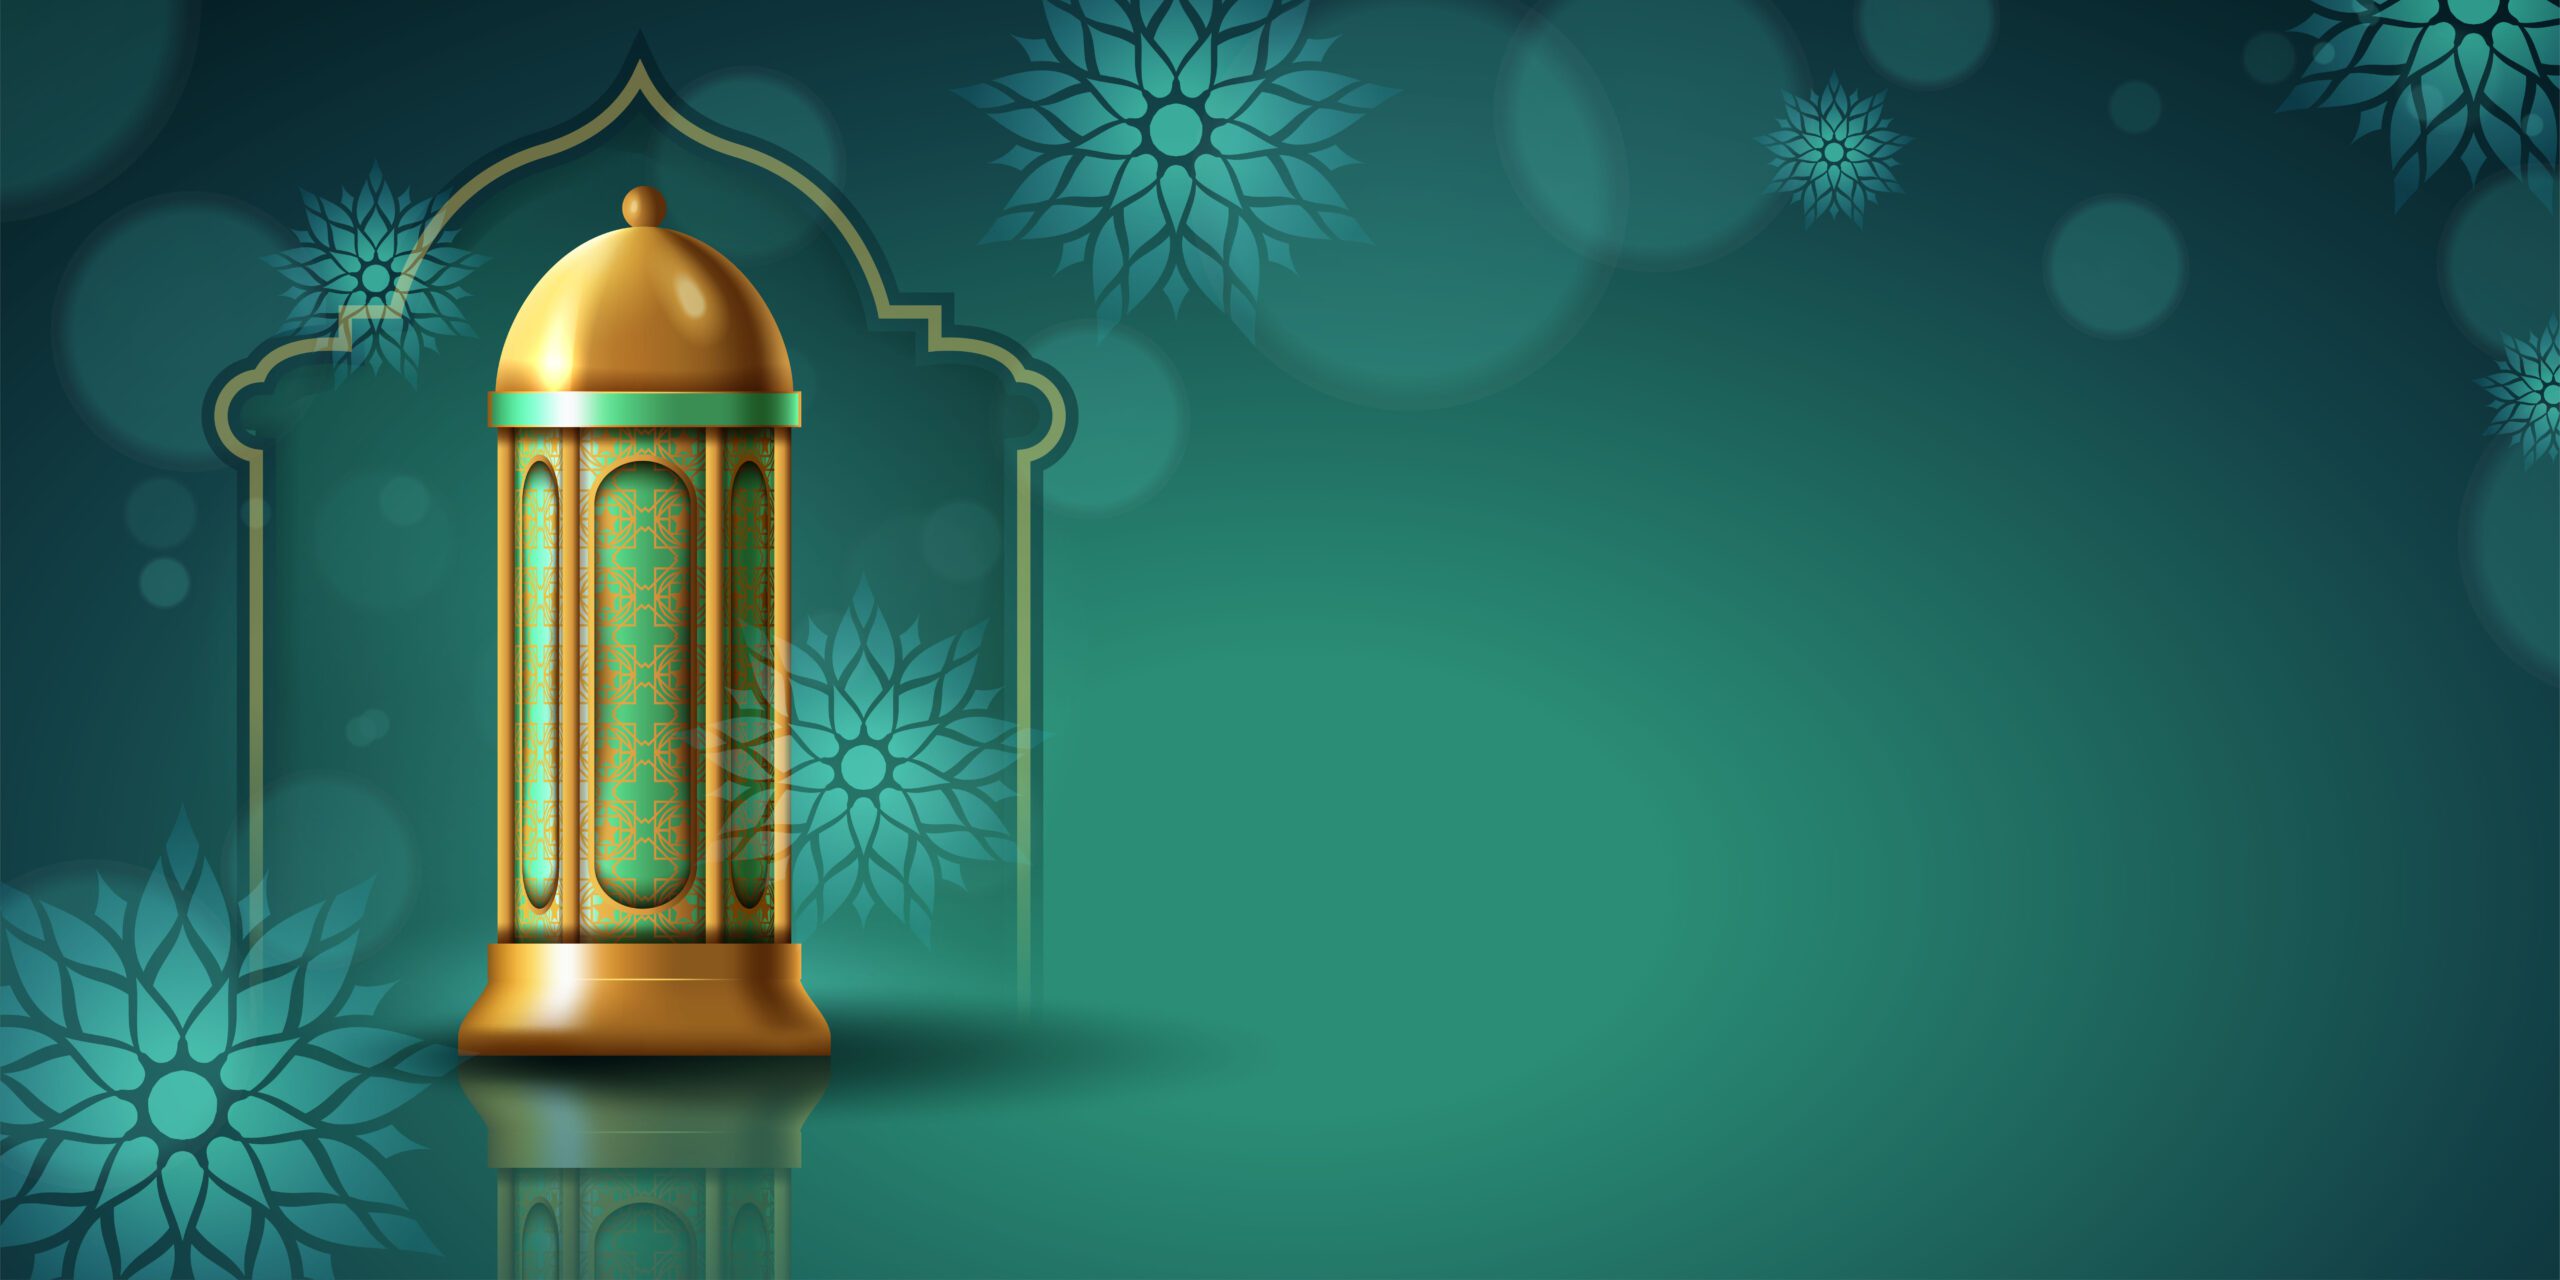 Online-Quran-Classes-cover-background